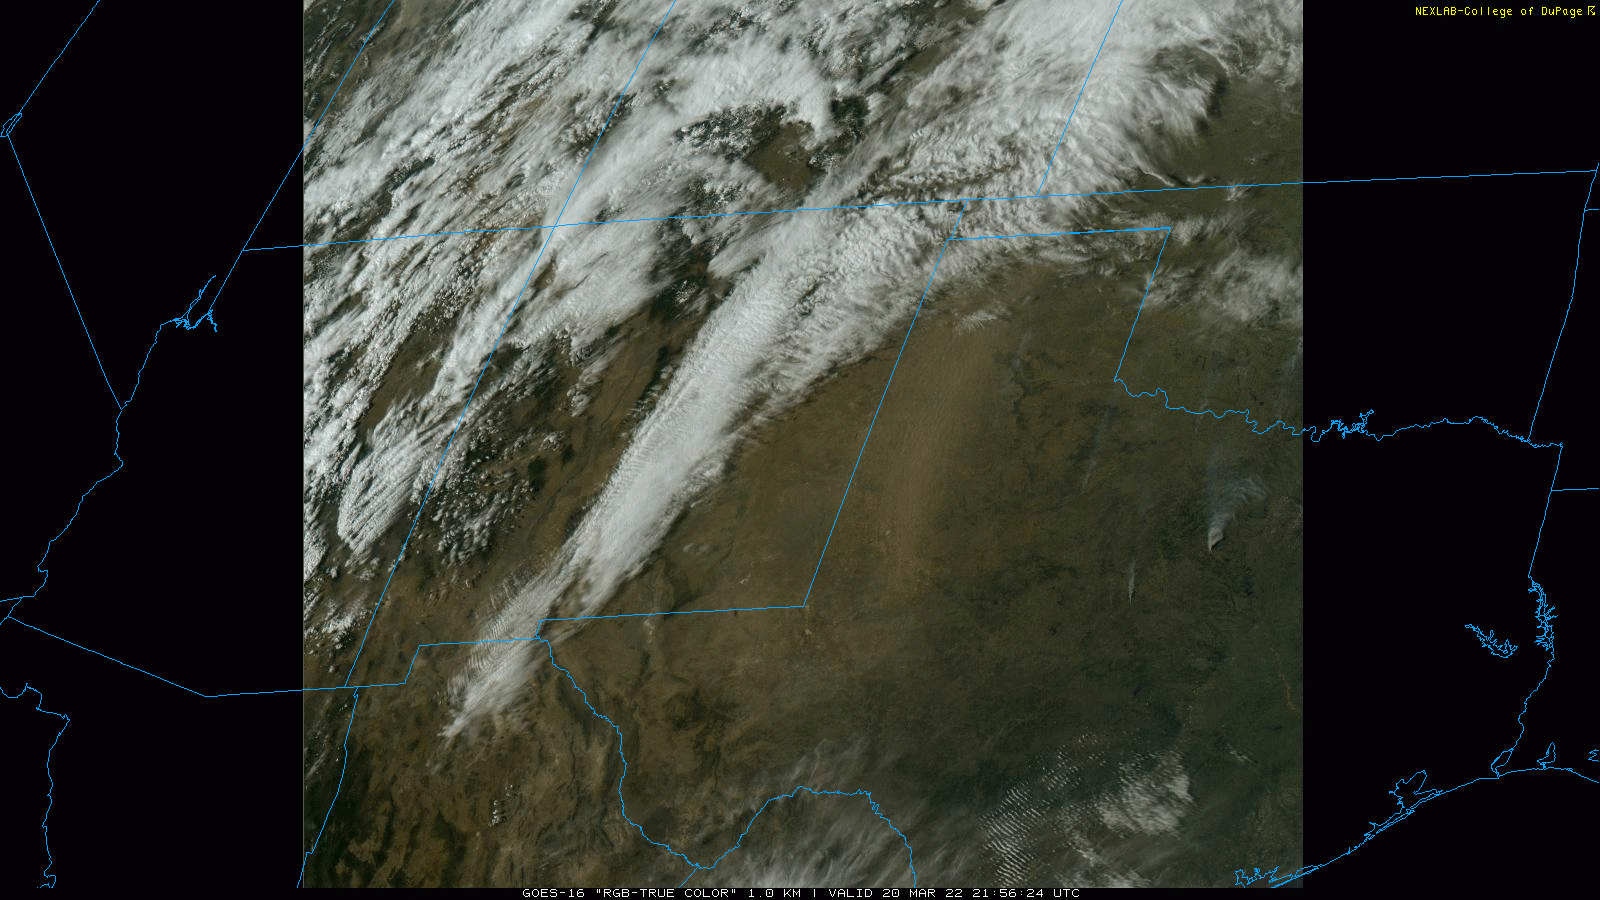 "True Color" satellite image valid from 4:56 pm to 5:02 pm on Sunday (20 March 2022). Note the extensive dust plume moving from south-to-north across the western South Plains and Texas Panhandle. Smoke plumes from fires in the Central Texas are also obvious.